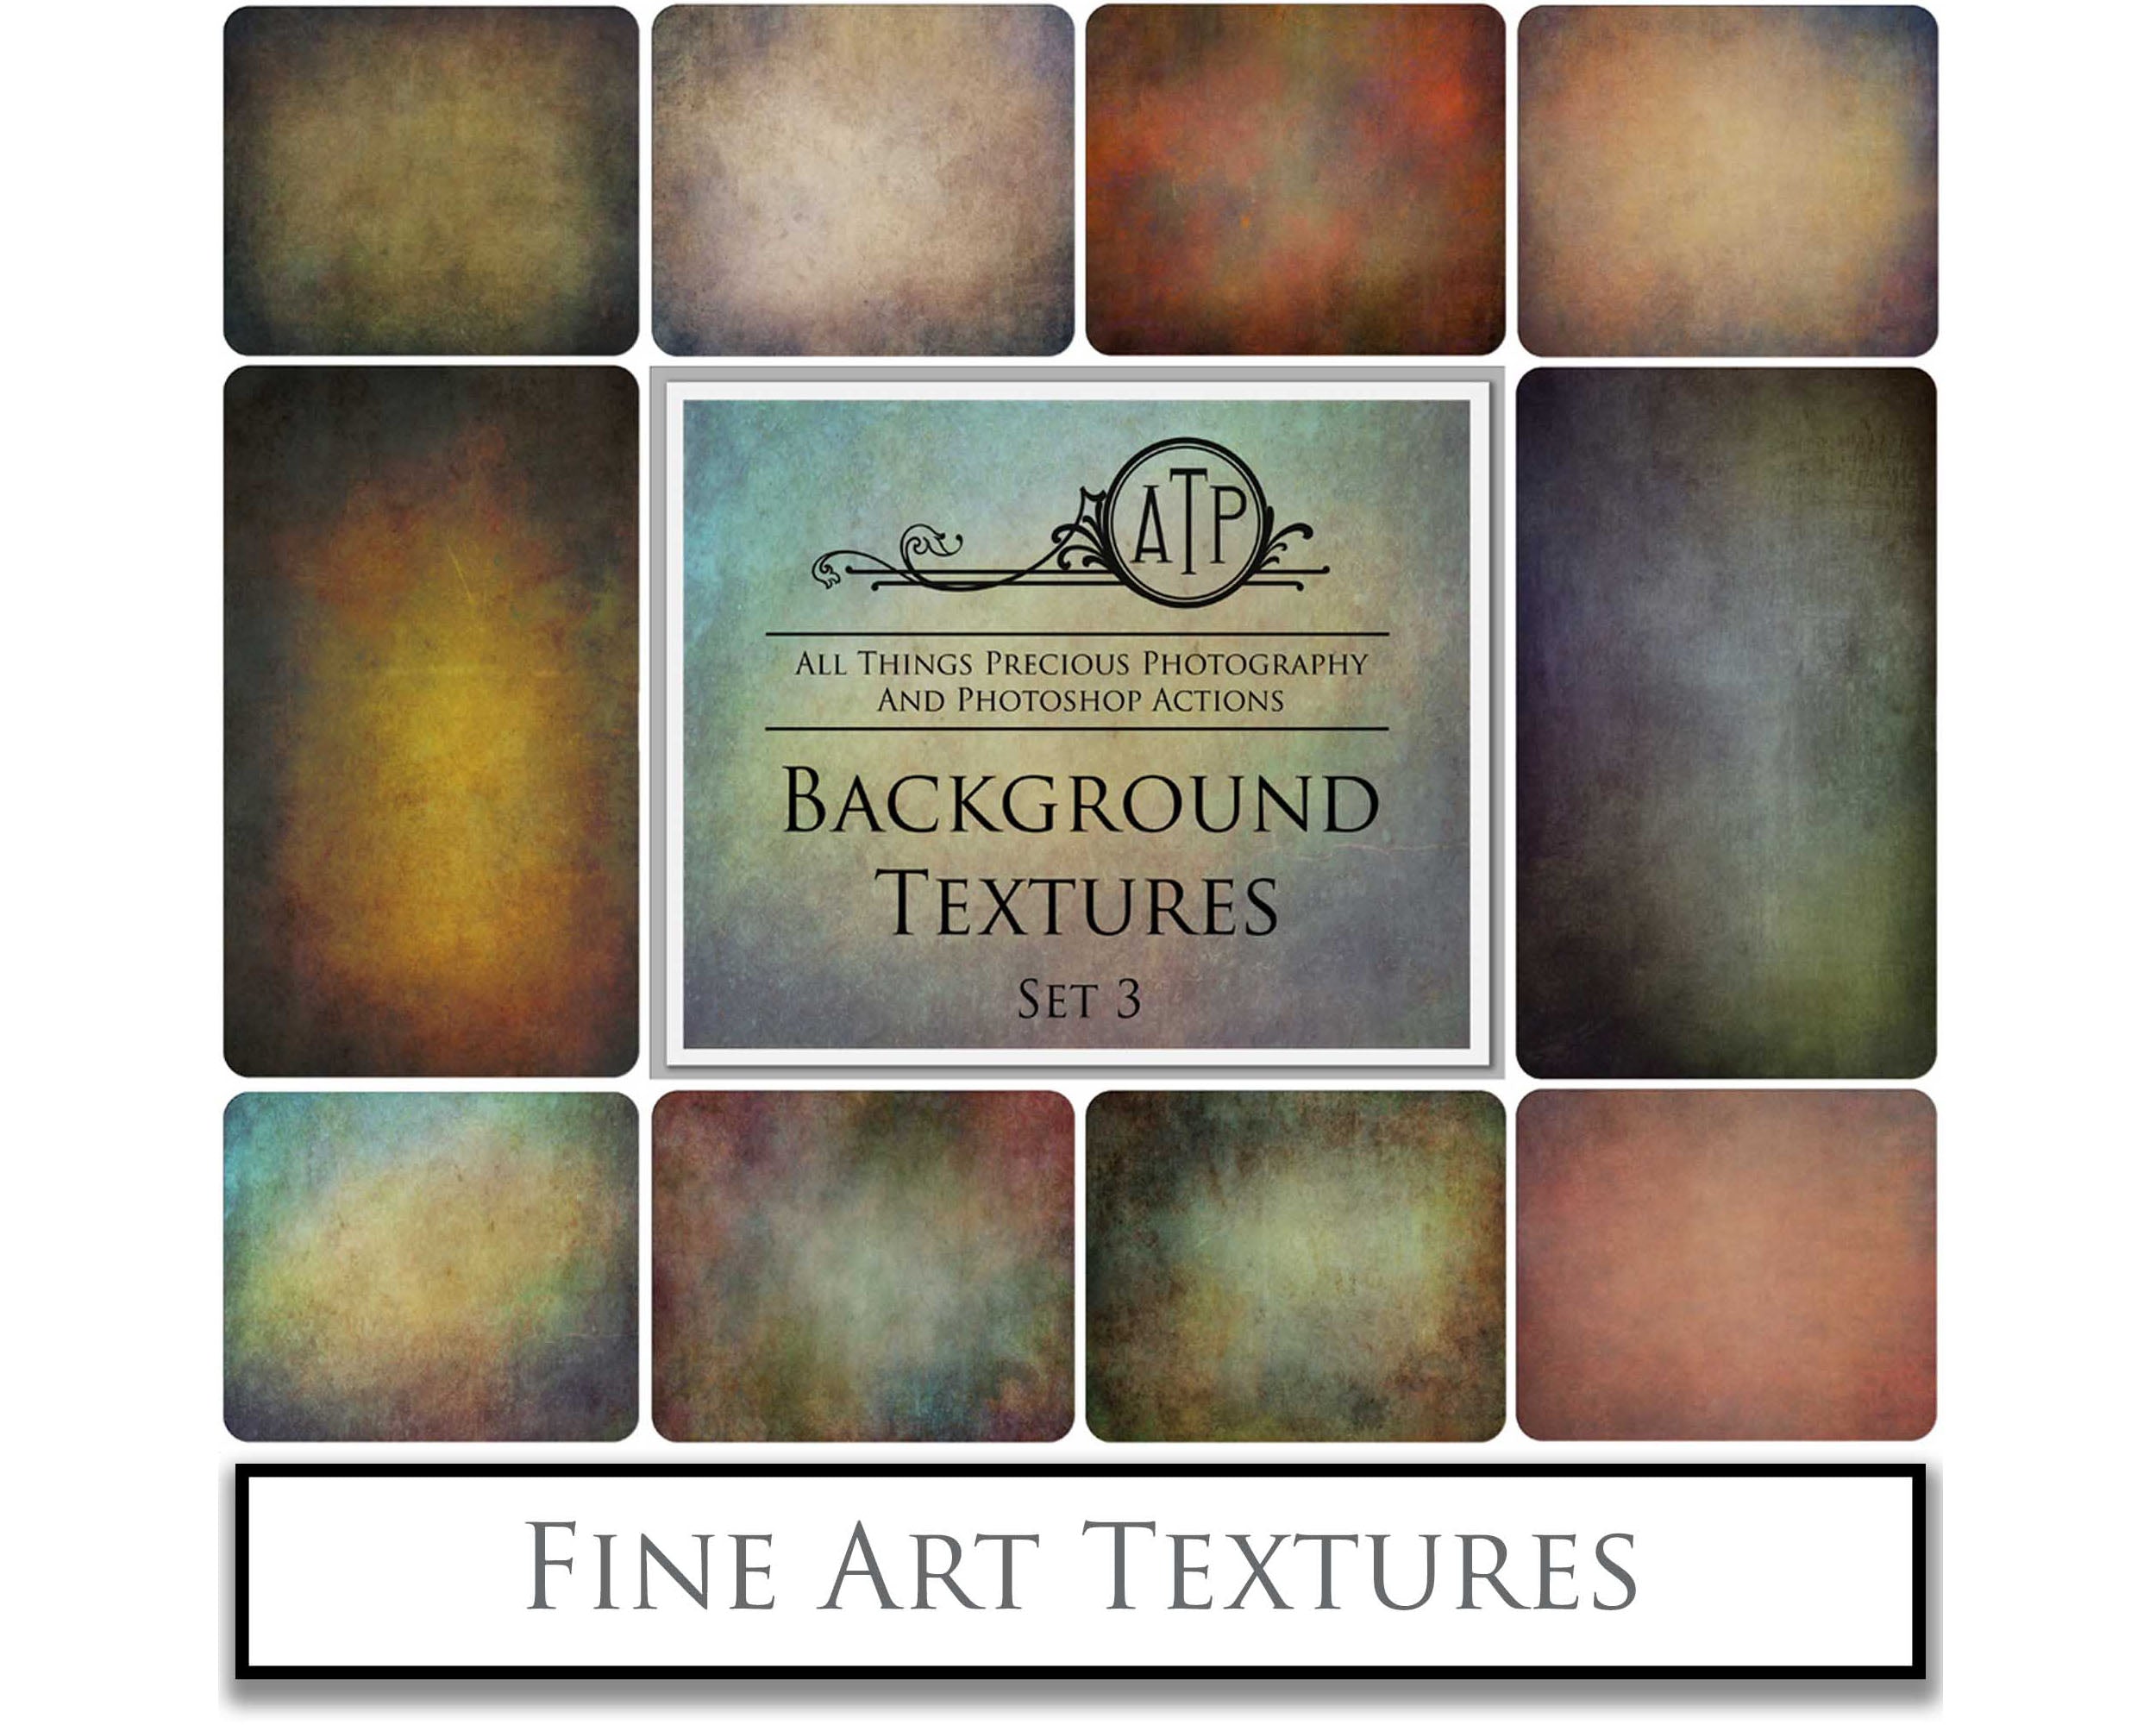 Fine Art Textures. For photography or print as backdrops. High resolution download files. Grunge, Warm, Light, Digital Add Ons. Canvas, Dark, Painterly, Color design. Digital Background Jpeg overlay. Printable Wall Art, Photoshop editing Graphic Assets. by ATP textures.